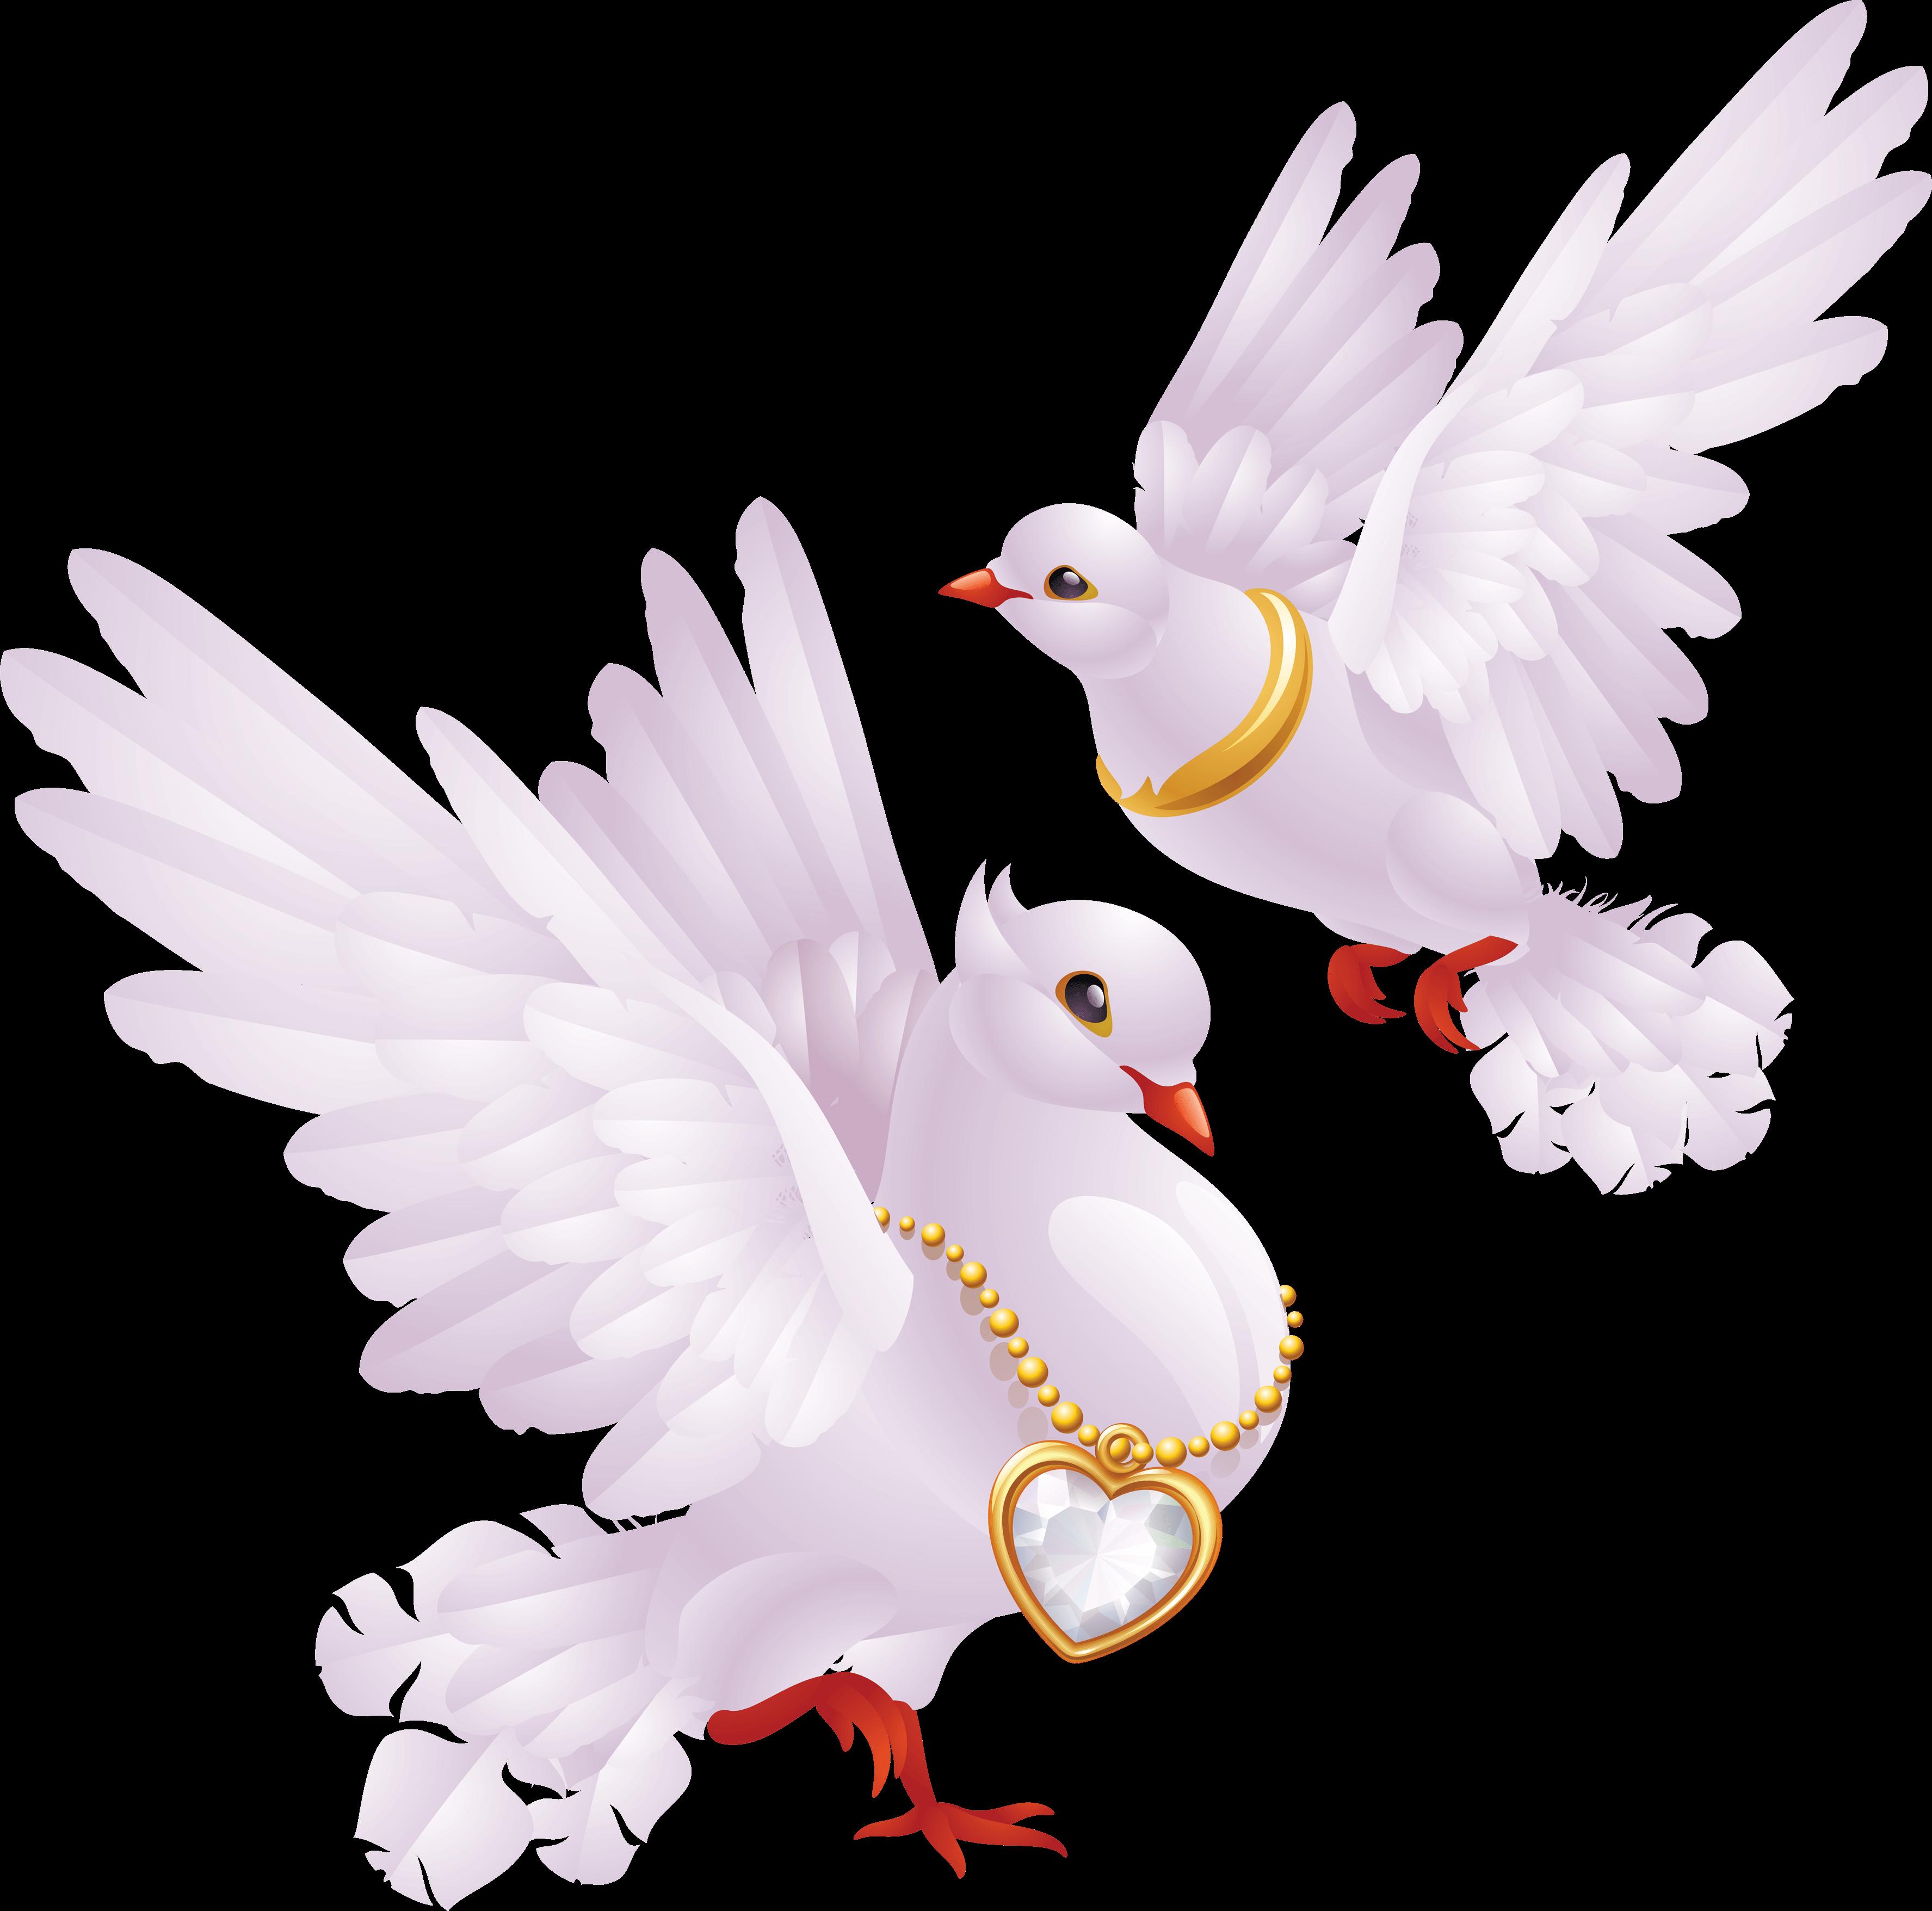 Download White Peace Pigeon HD Image Free HQ PNG Image | FreePNGImg